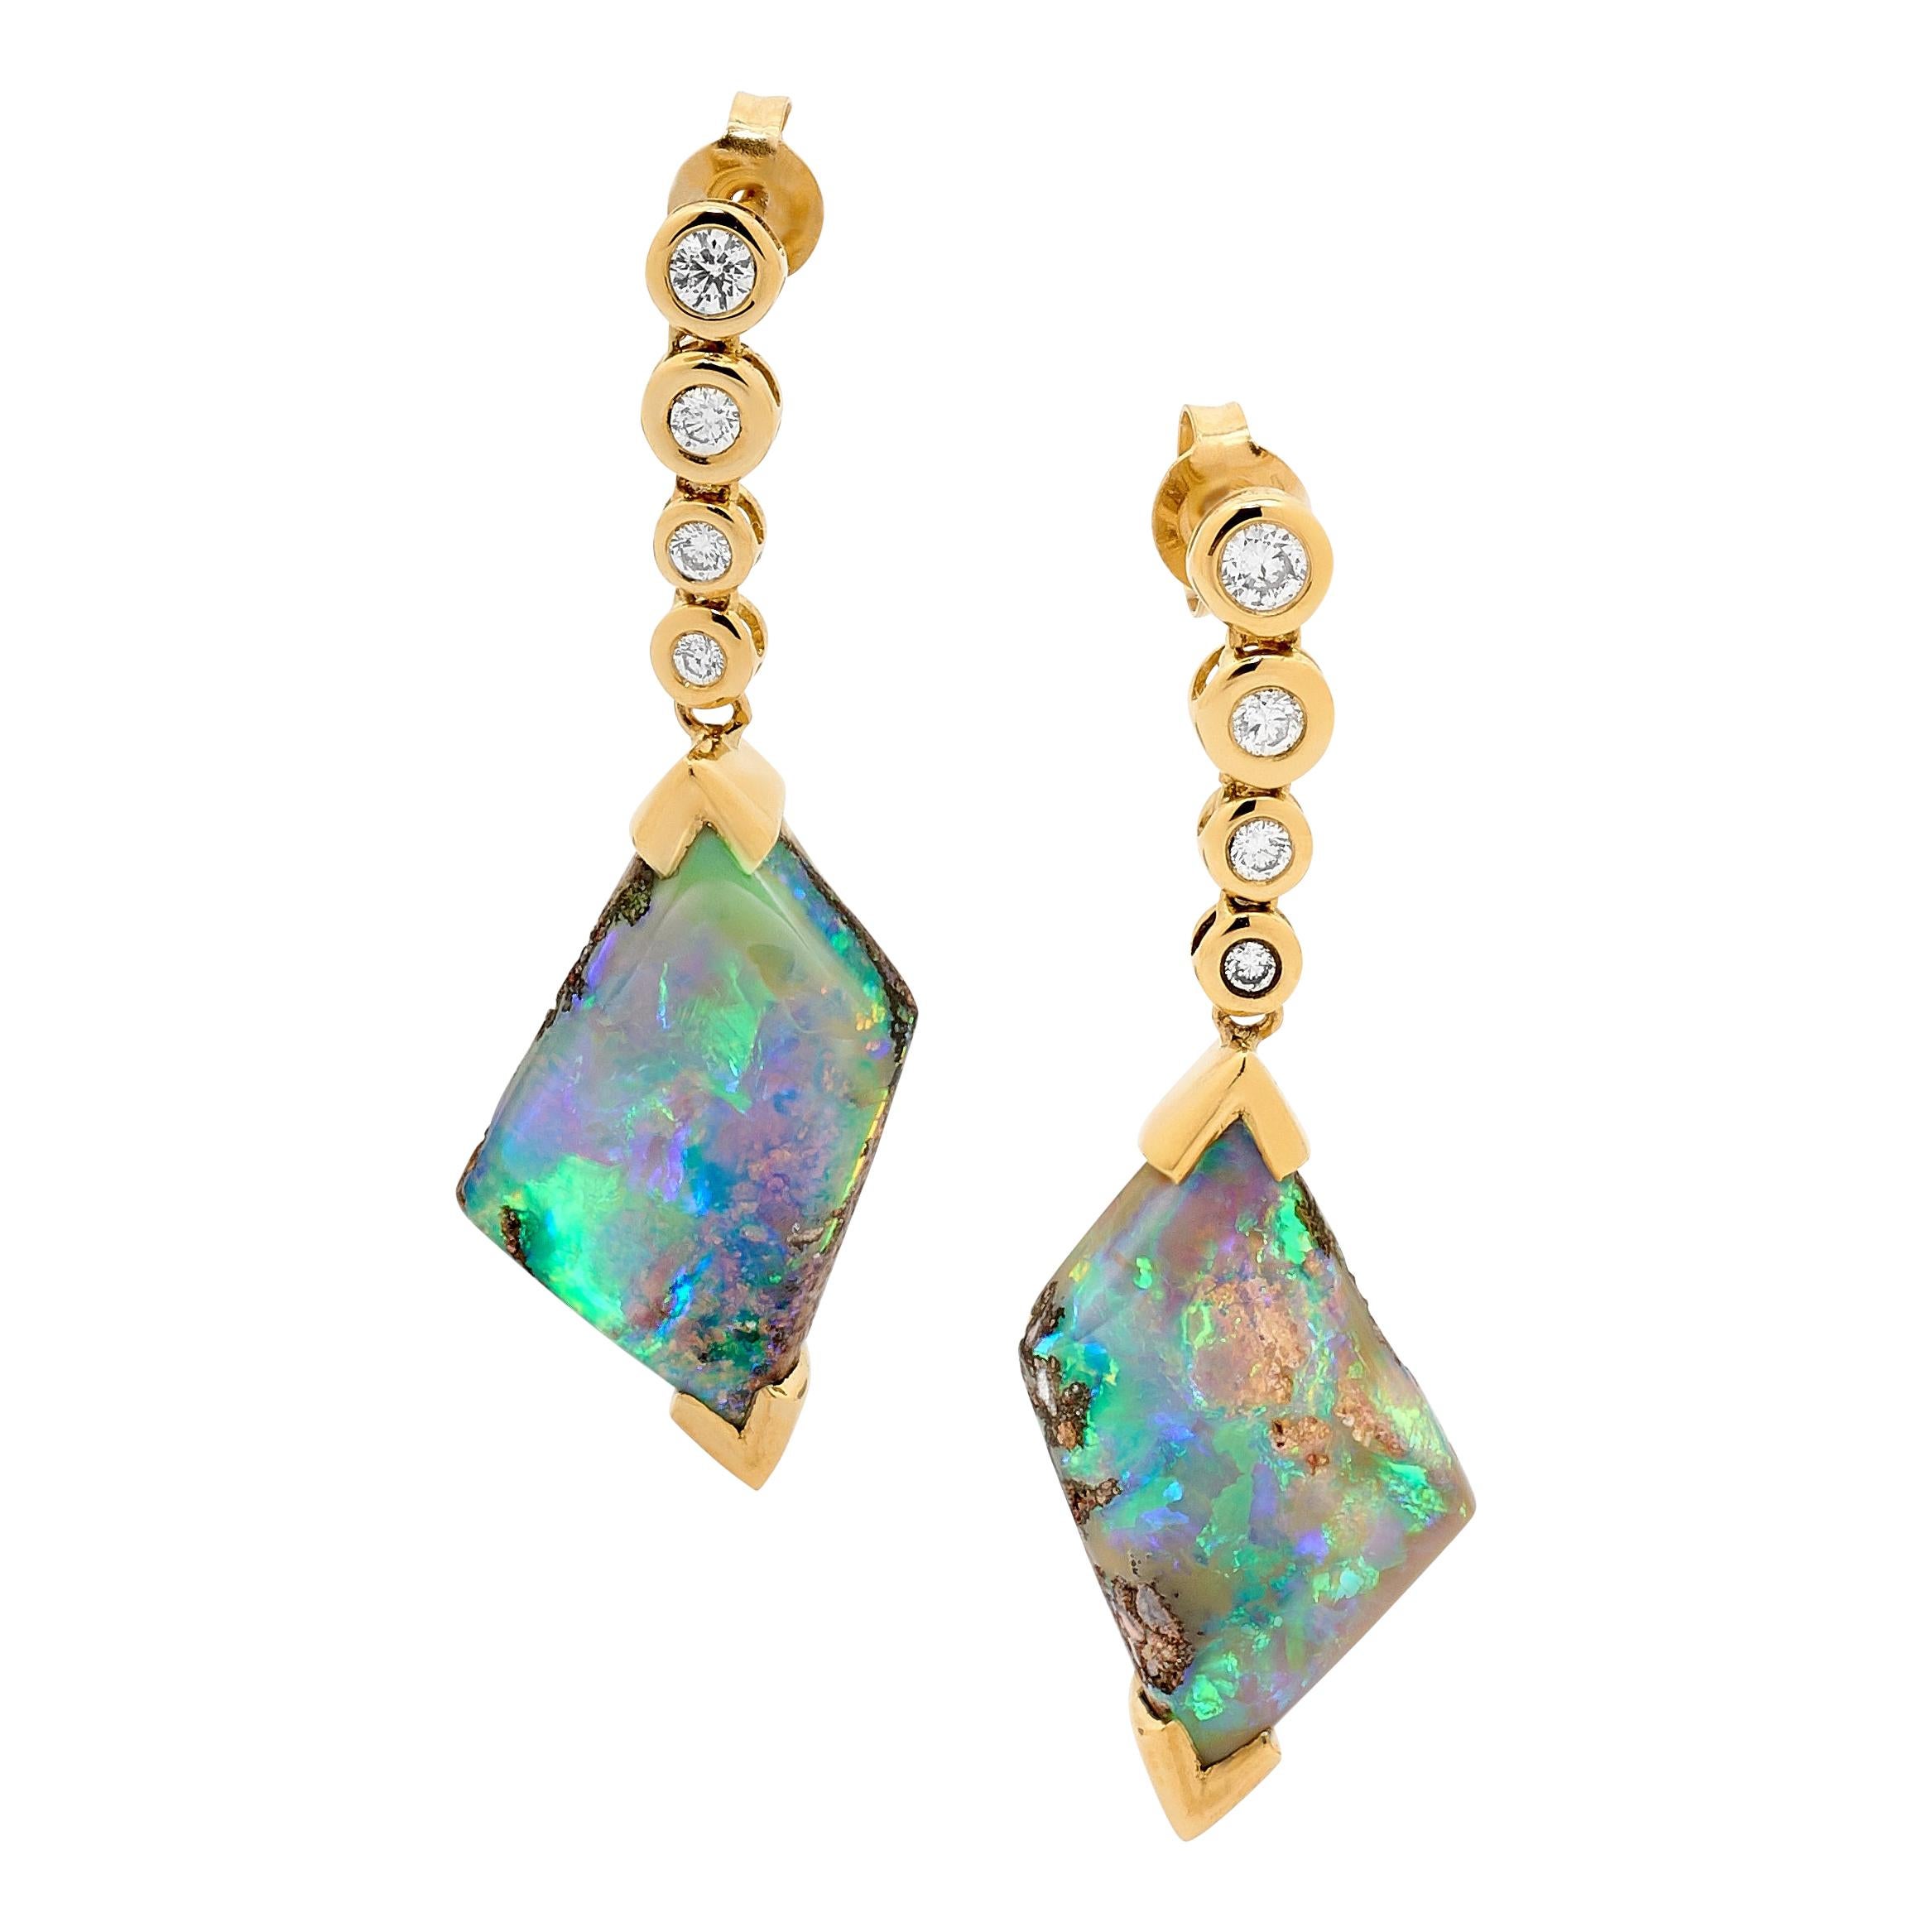 “Deep Love” opal (12.46ct) earrings tell a story of an ocean dive. Diamond air bubbles appear to lift these beautifully paired opals to the surface of an imaginary ocean. Sourced from our own mines in Jundah-Opalville and set in 18K yellow gold,